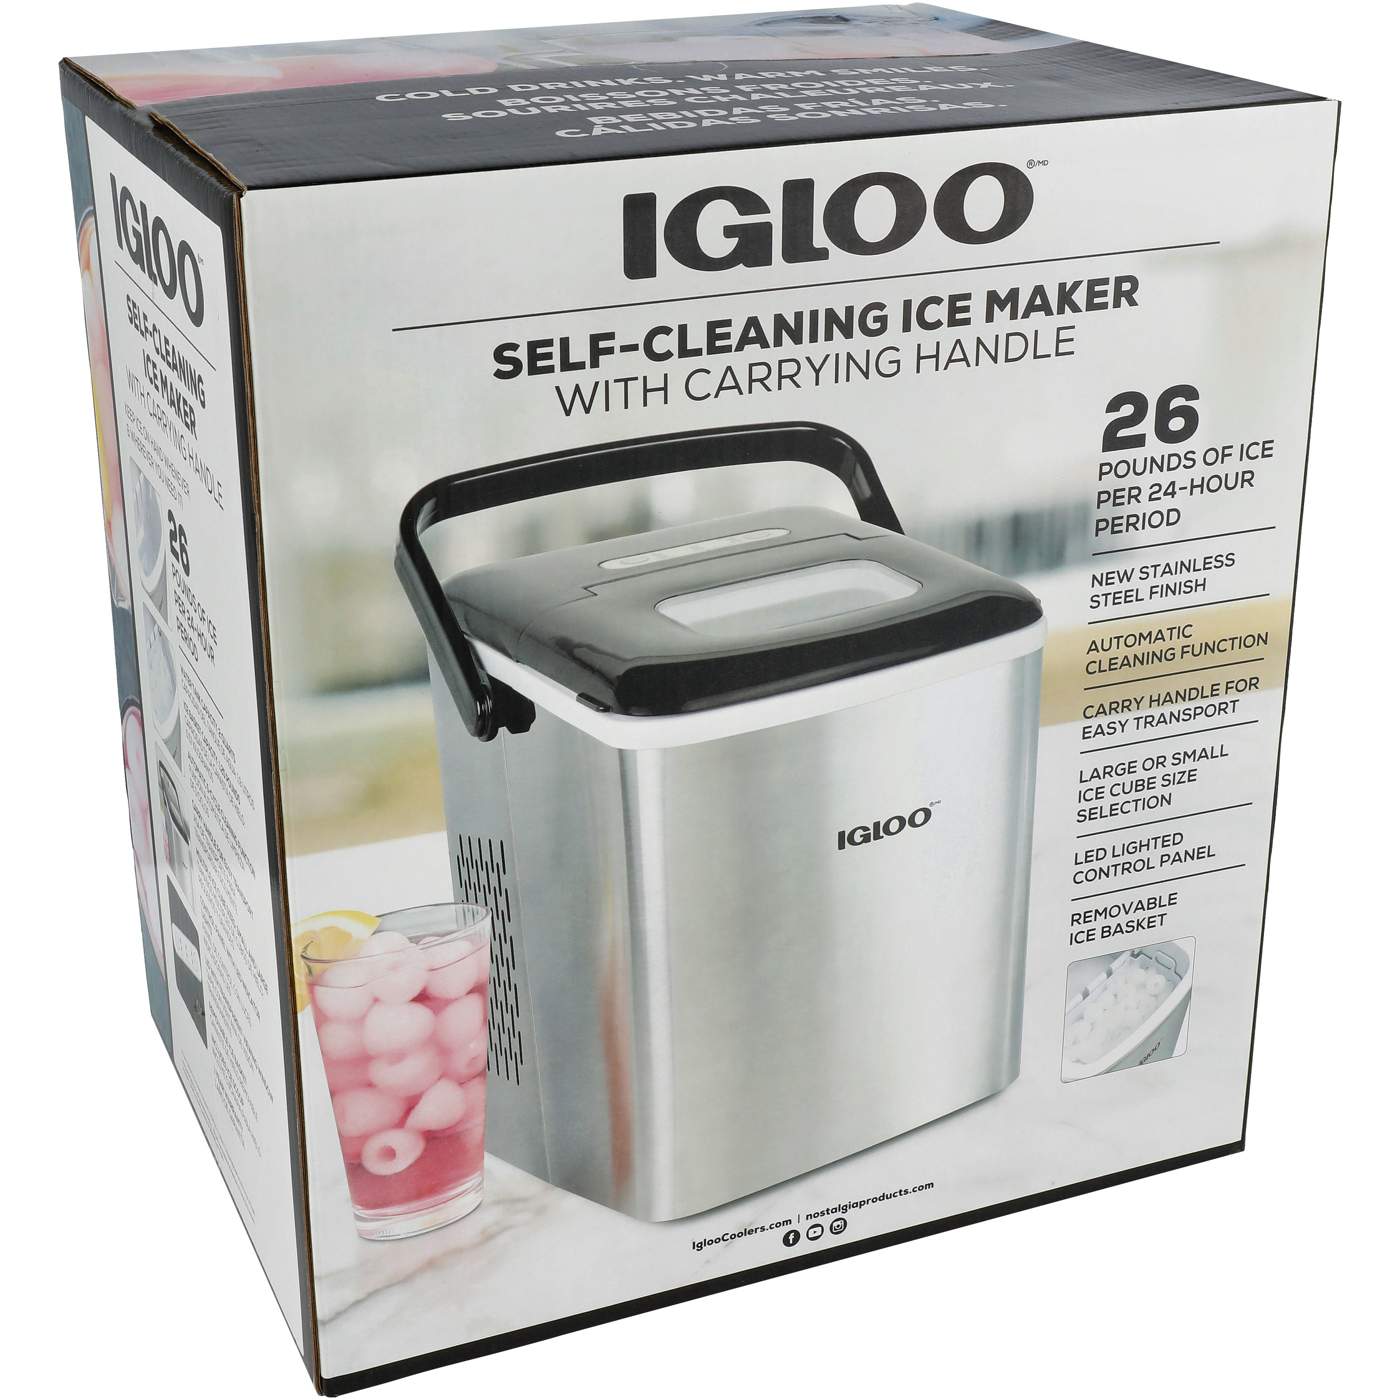 Igloo Self Cleaning Ice Maker with Carrying Handle - Shop Blenders